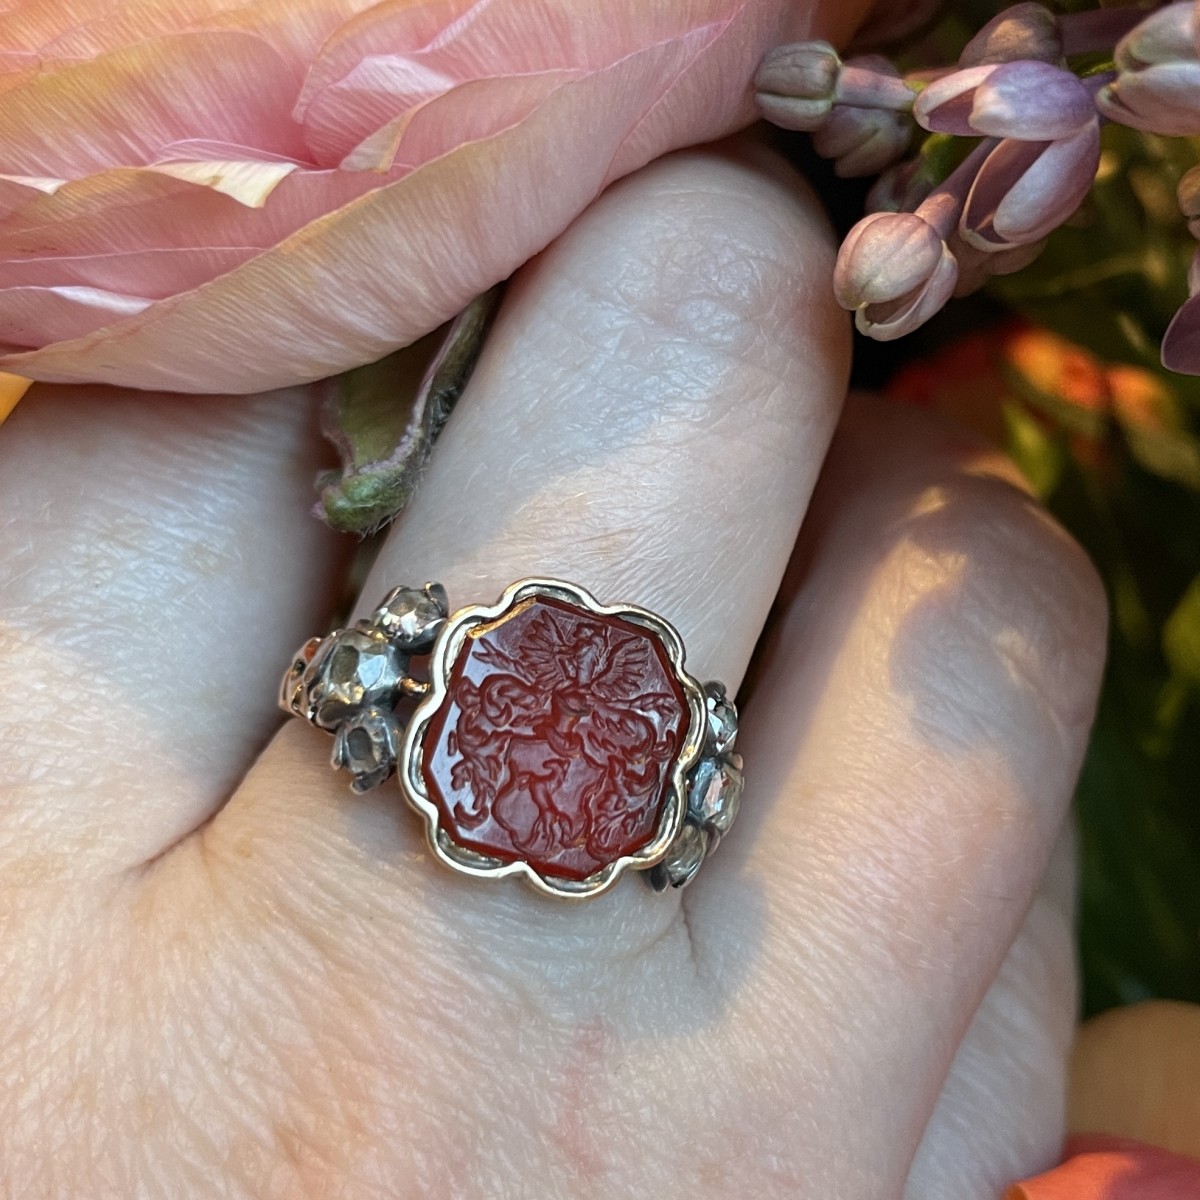 Sold at Auction: 14-Karat Yellow-Gold and Carved Carnelian Ring and a  14-Karat Yellow-Gold and Carved Coral Ring, 5.8 gross dwt; Sizes: 5 1/4 ( carnelian) and 5 1/2 (coral)